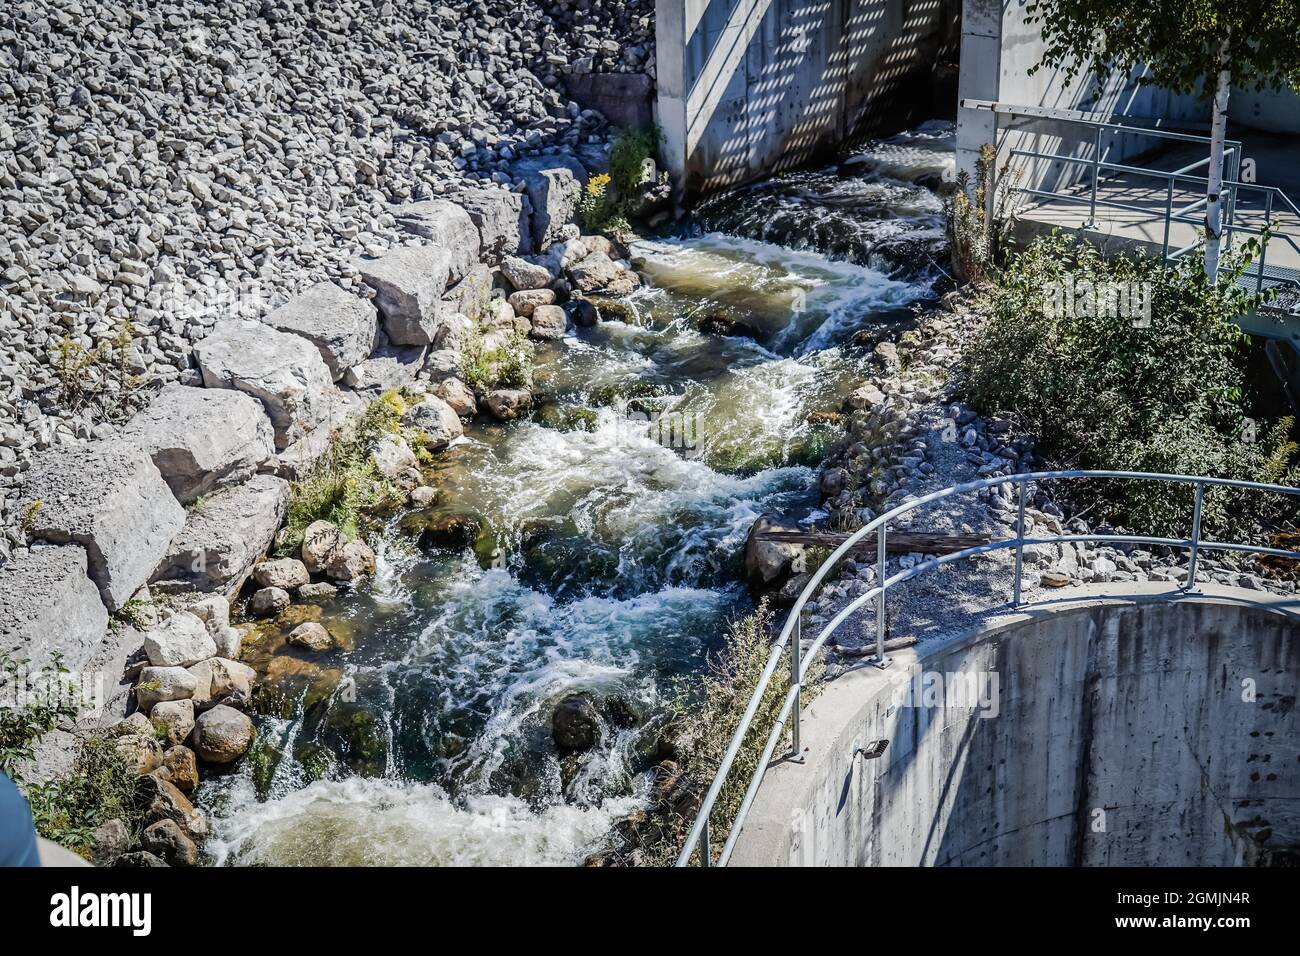 Thornbury fishway or fish ladder allows fishes such as salmon and rainbow trout to swim upstream and spawn or laid eggs during the fall season, in Tho Stock Photo